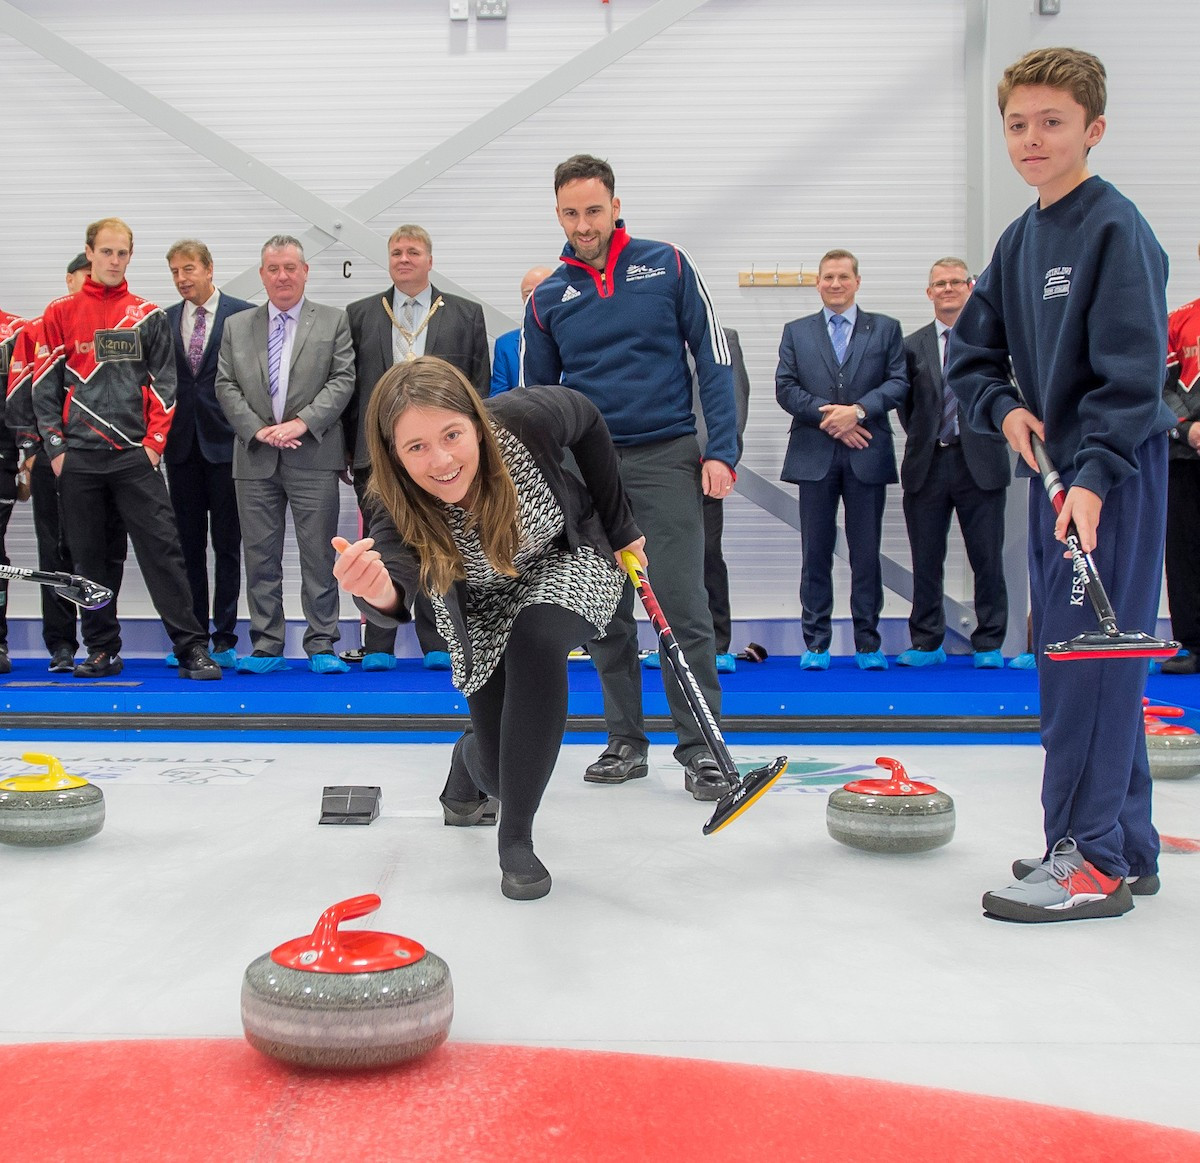 Aileen Campbell, Minister for Public Health and Sport, delivers the opening stone at the newly opened National Curling Academy in Stirling, Scotland ©Alan Peebles